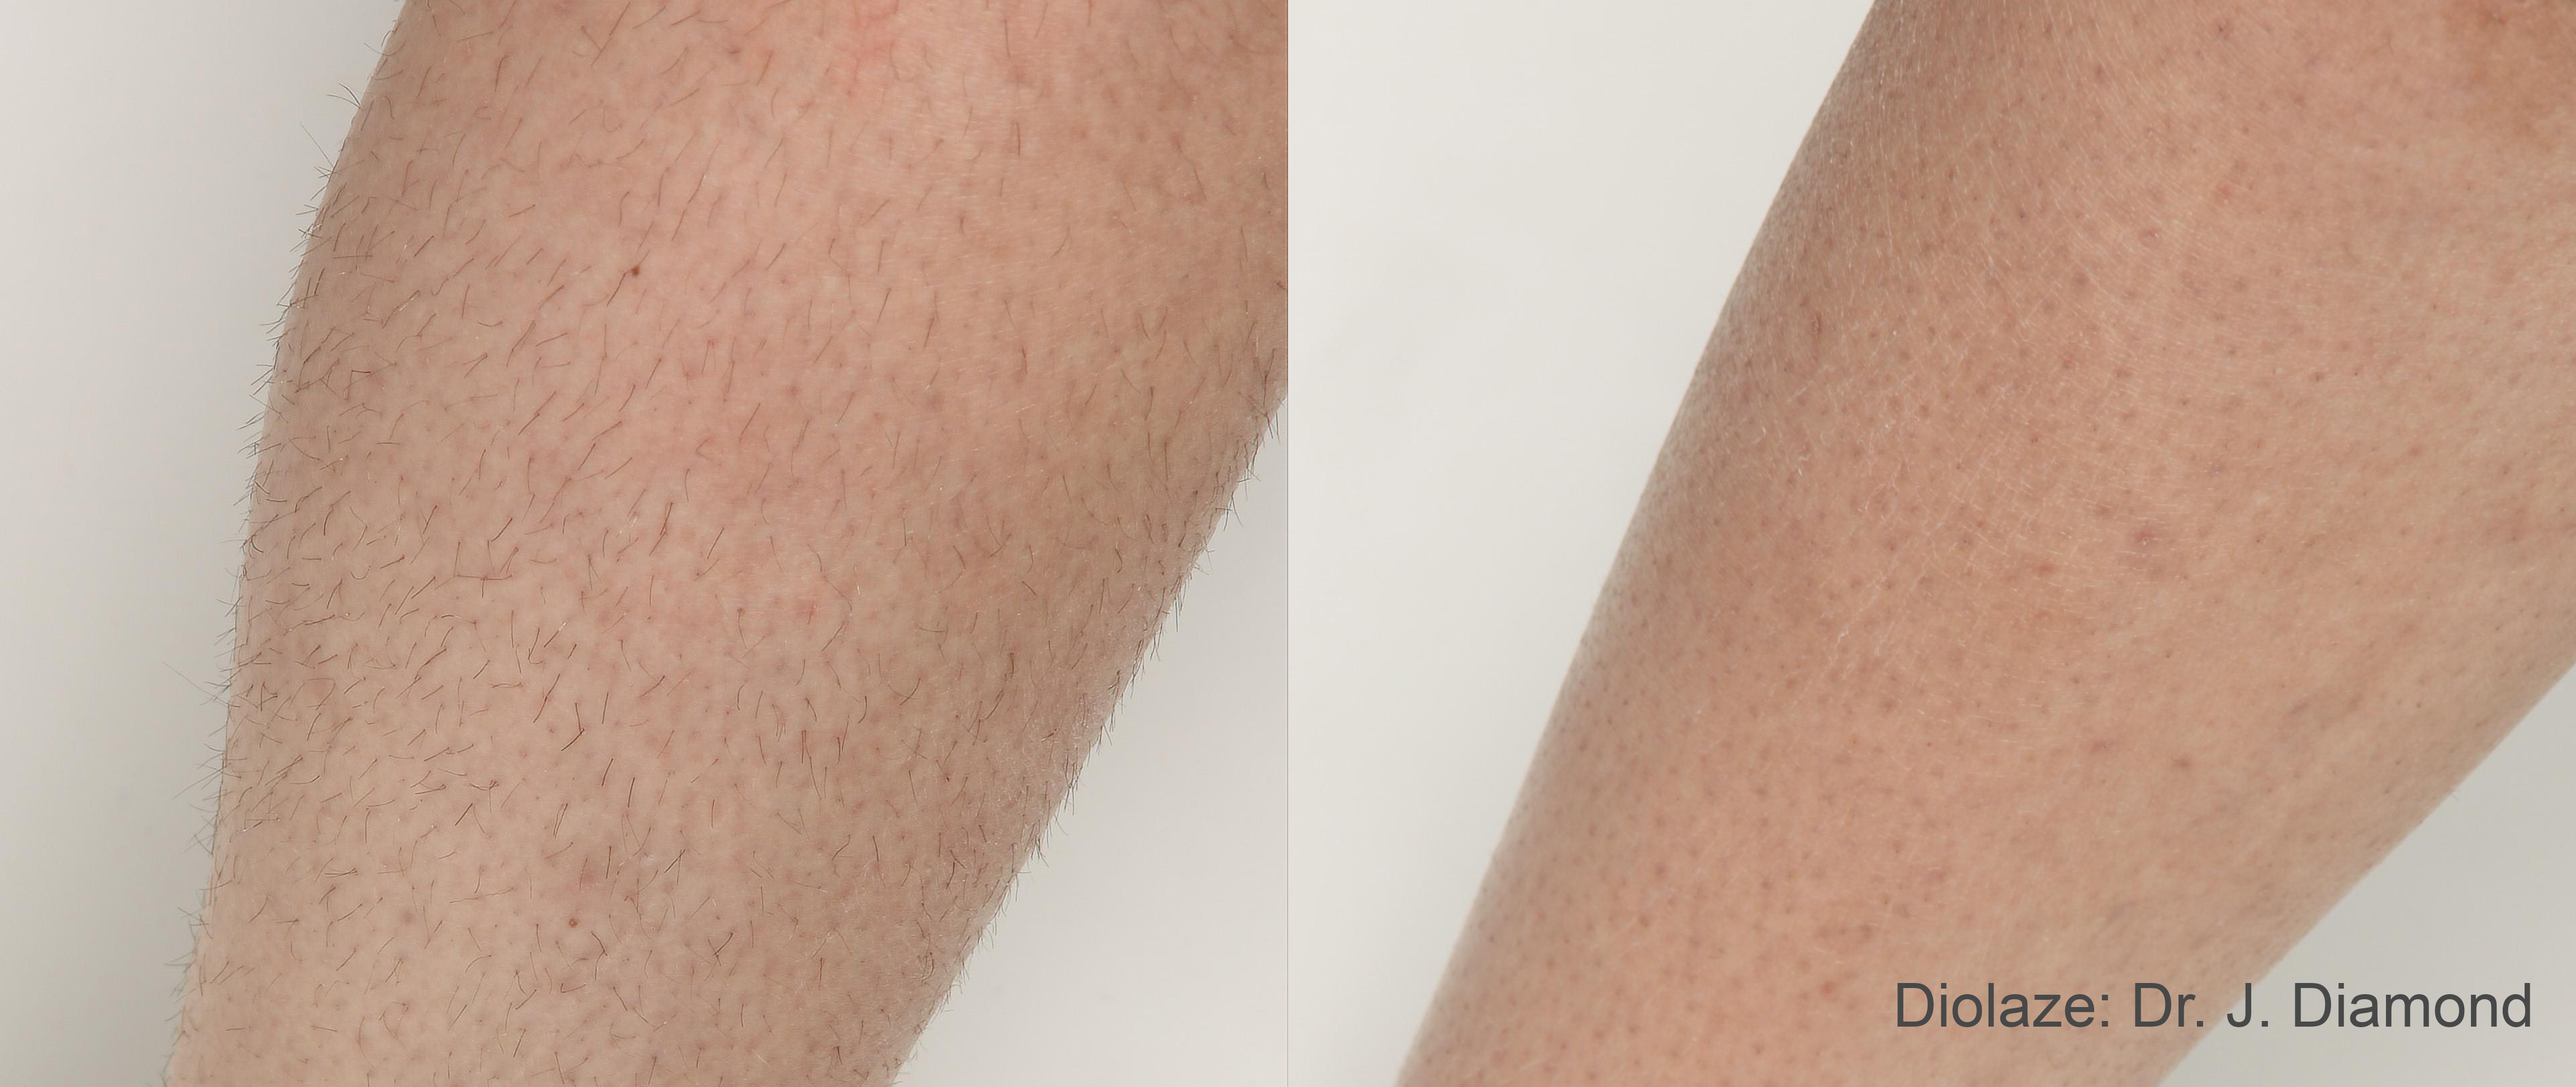 Before and after photos of laser hair removal